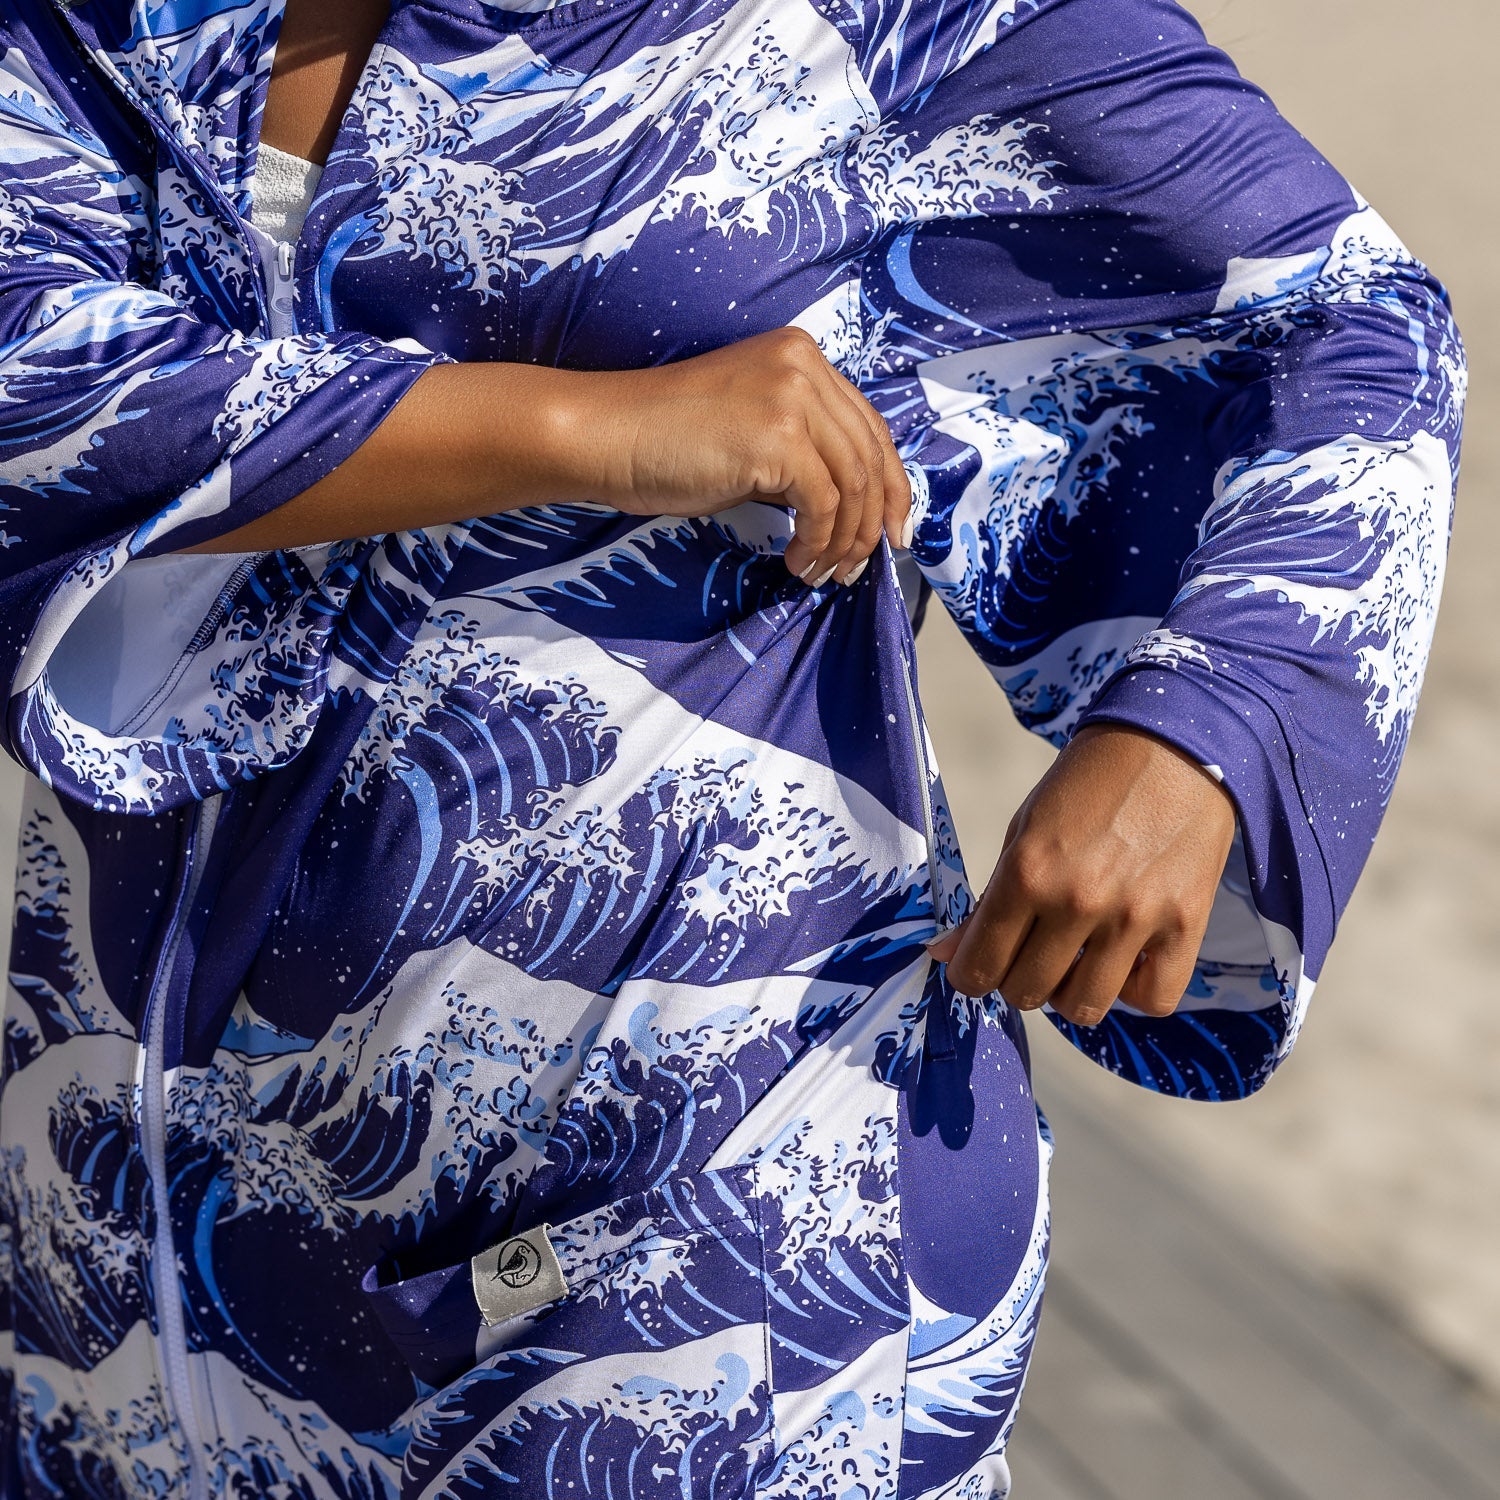 Winter Wave: Fleece Lined Change AnyWear Robe – Plover Robes